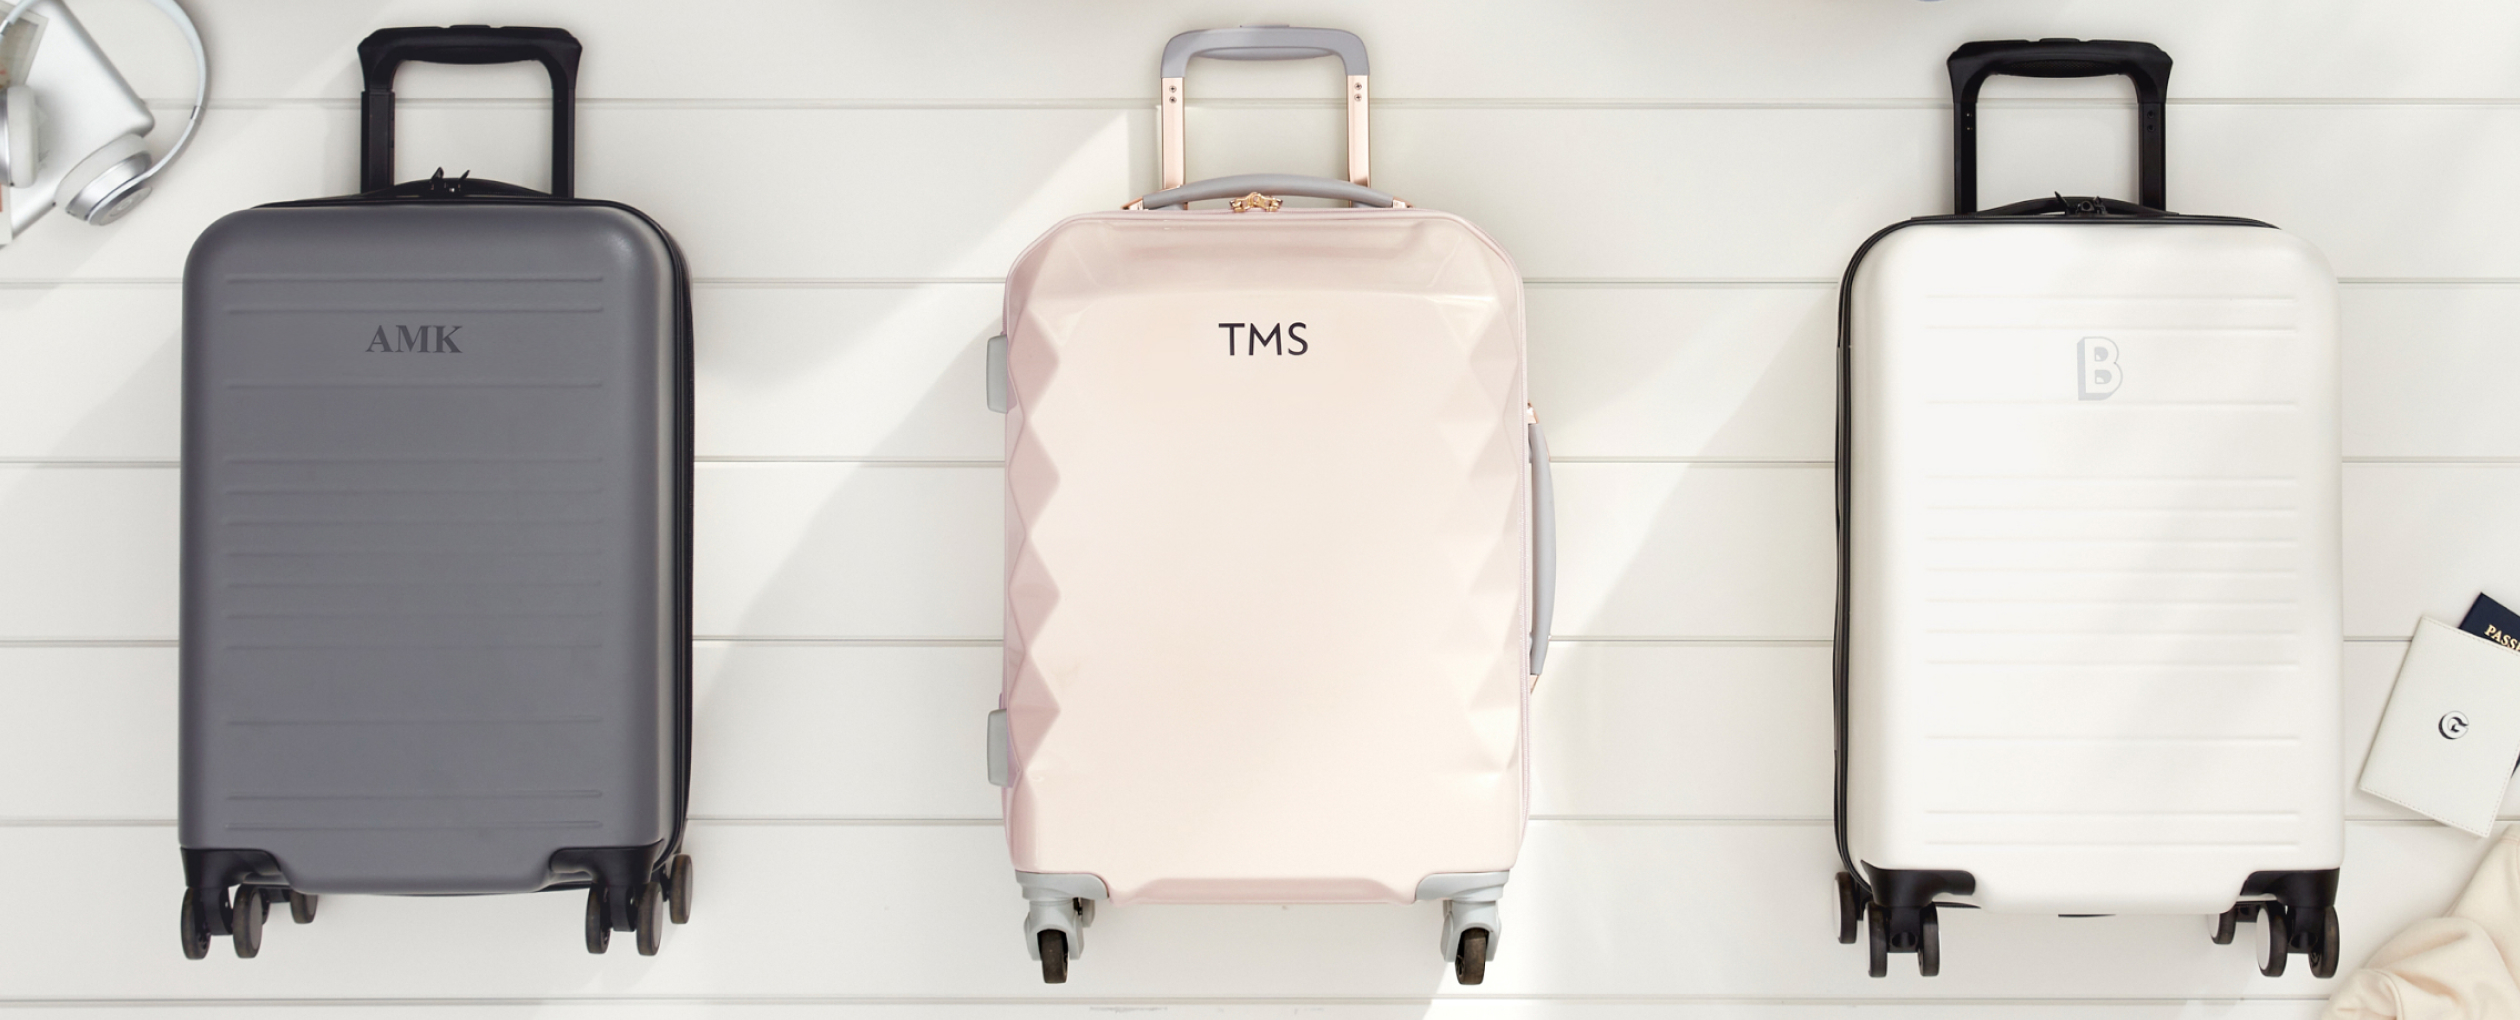 3 Luggage bags with similar color schemes including dark gray, light pink, and white, all of which have monogrammed personalizations, lie on top of an off white wood paneled background.